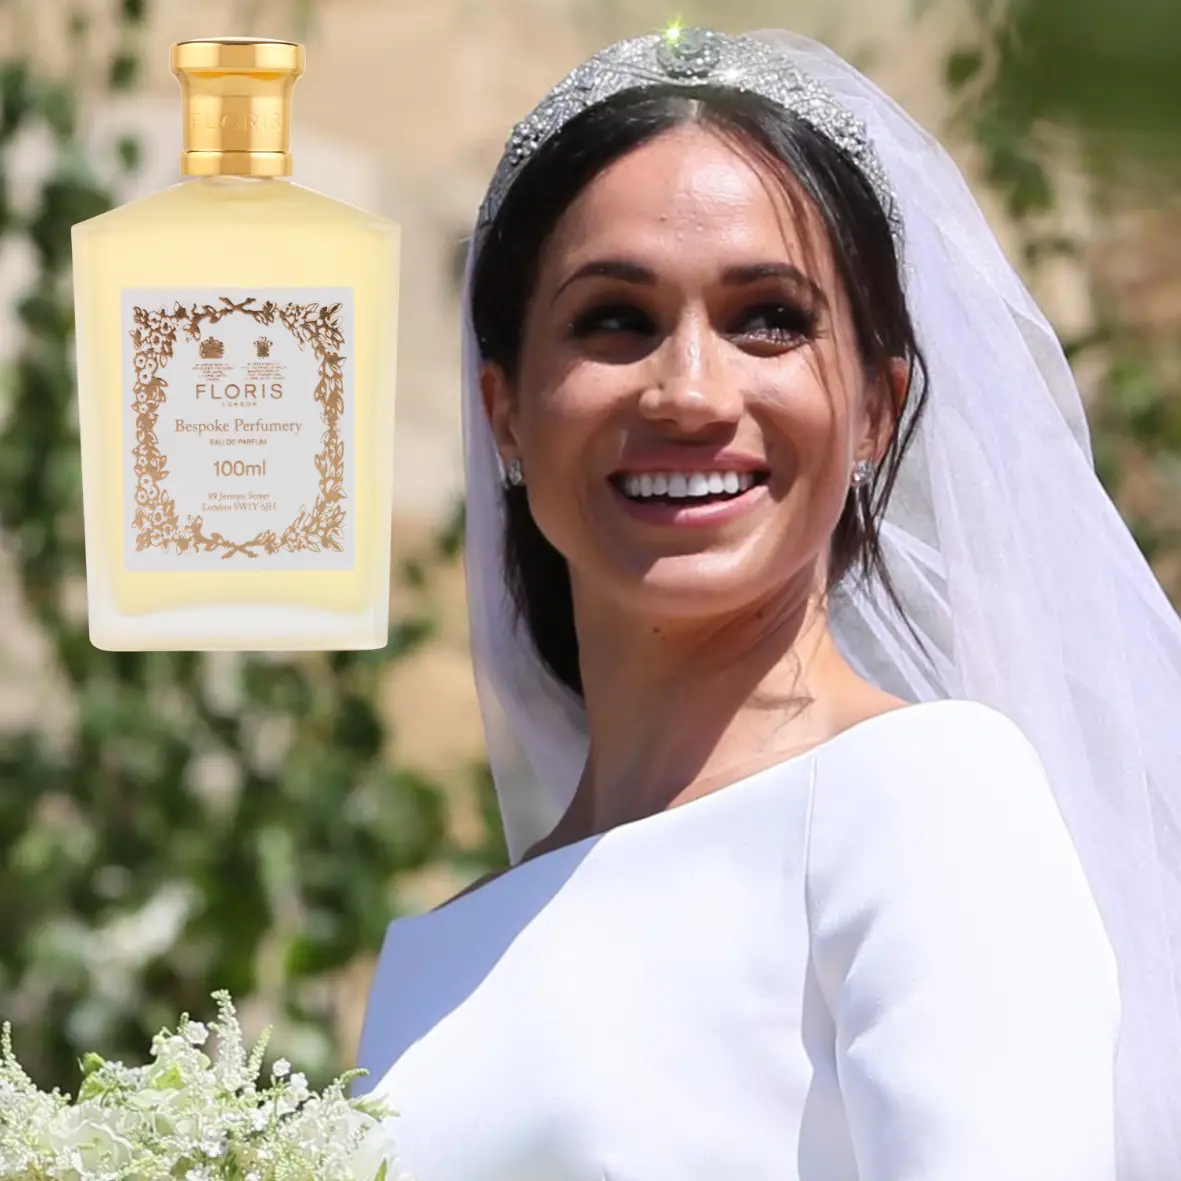 What perfume did Meghan Markle wear on her Wedding Day?